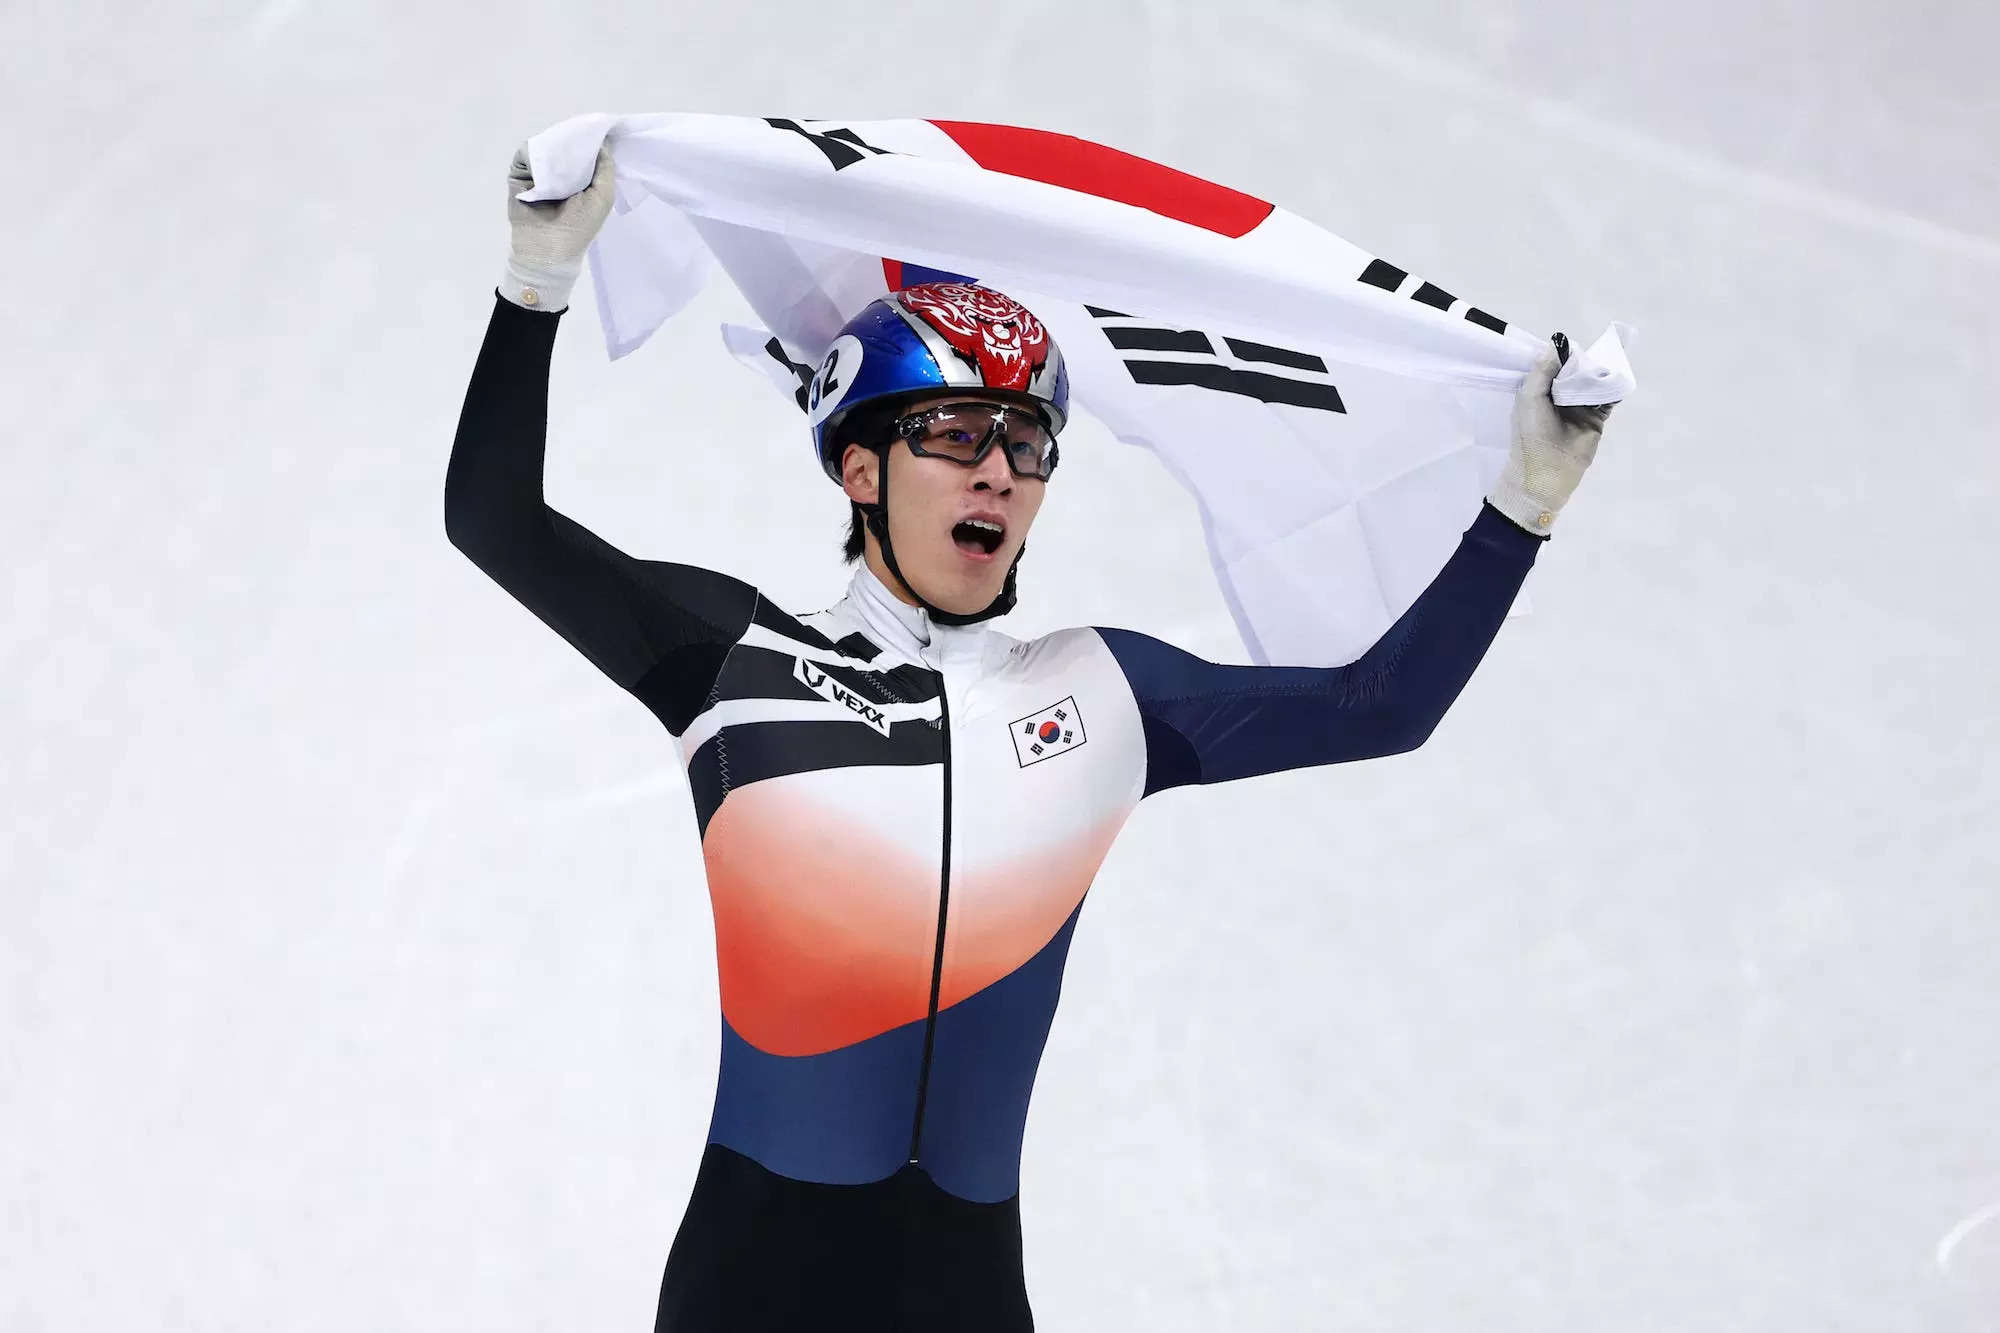 Chinese speed skater, Disqualified race, Judging bias, Business Insider India, 2000x1340 HD Desktop